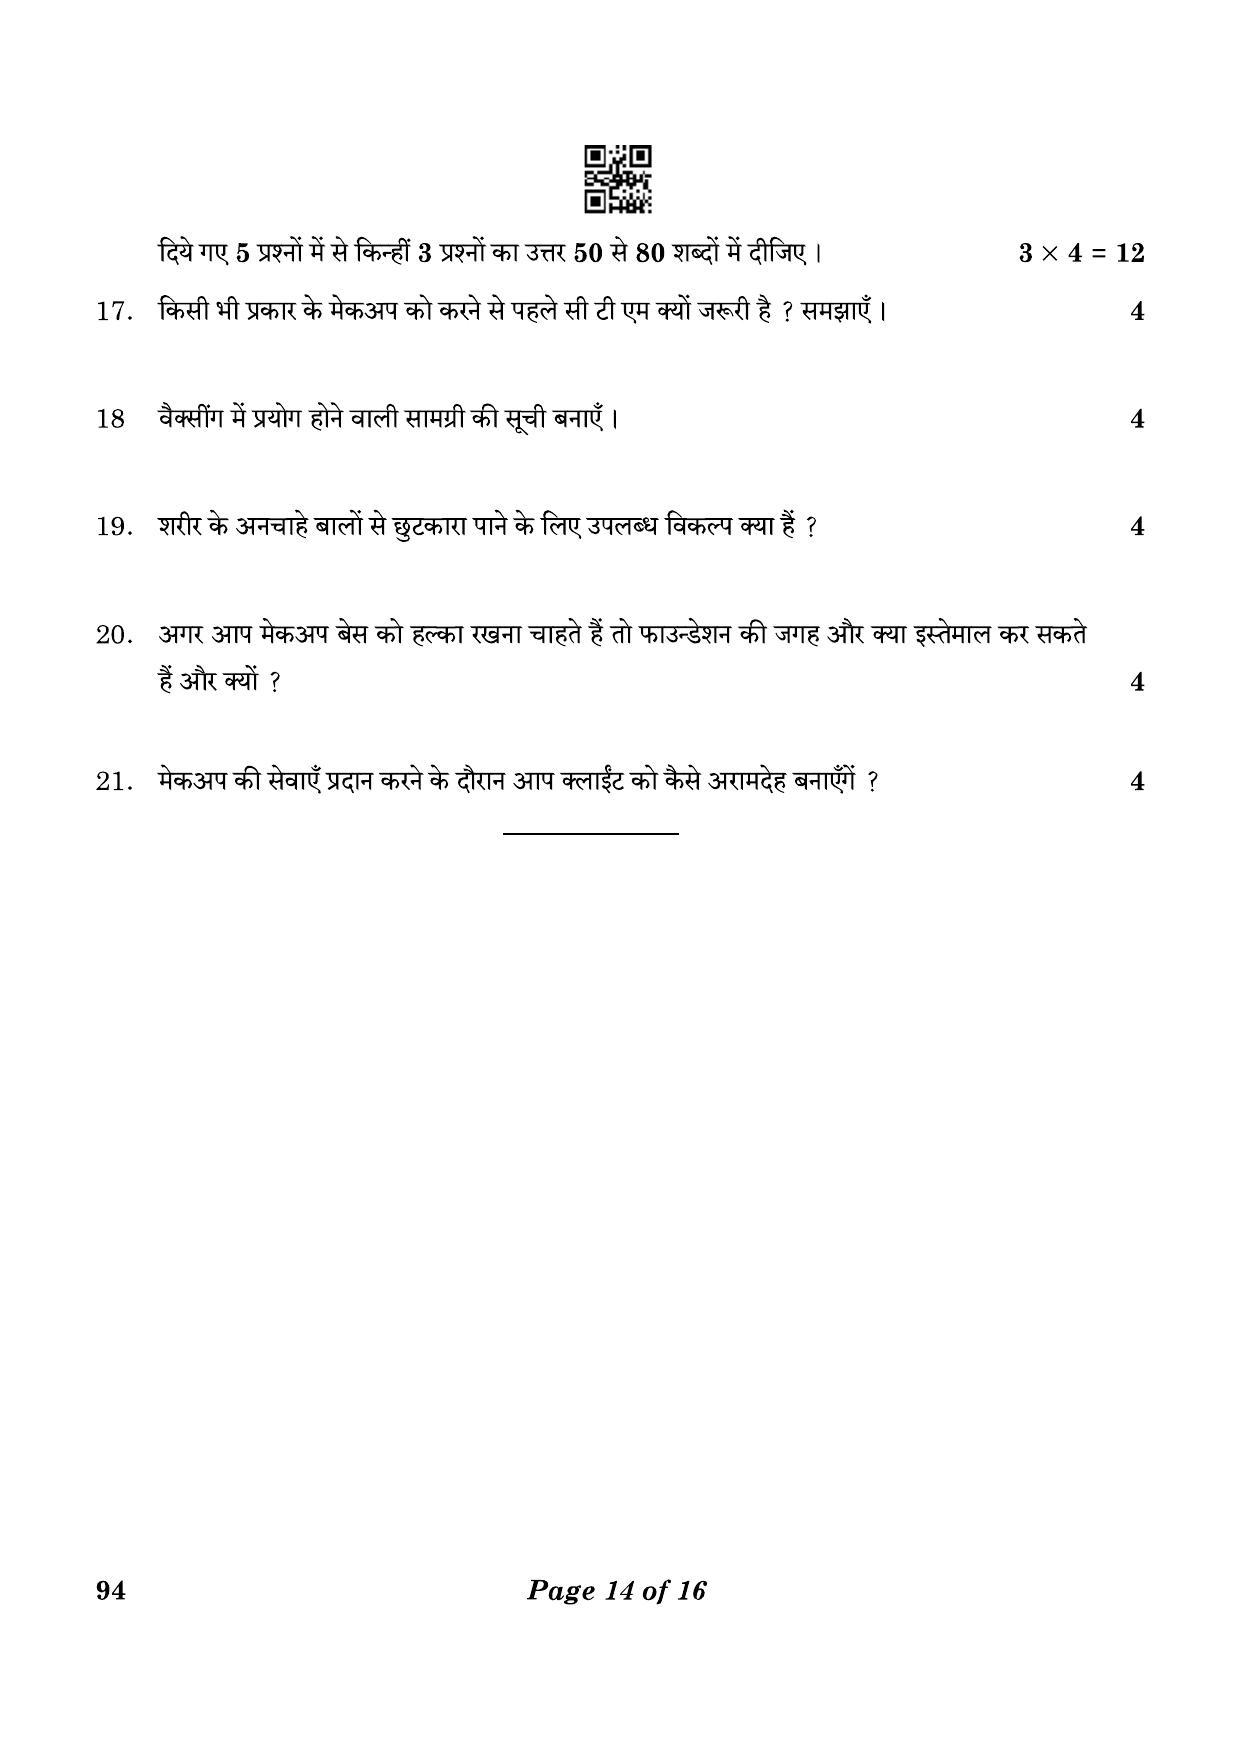 CBSE Class 10 94 Beauty And Wellness 2023 Question Paper - Page 14